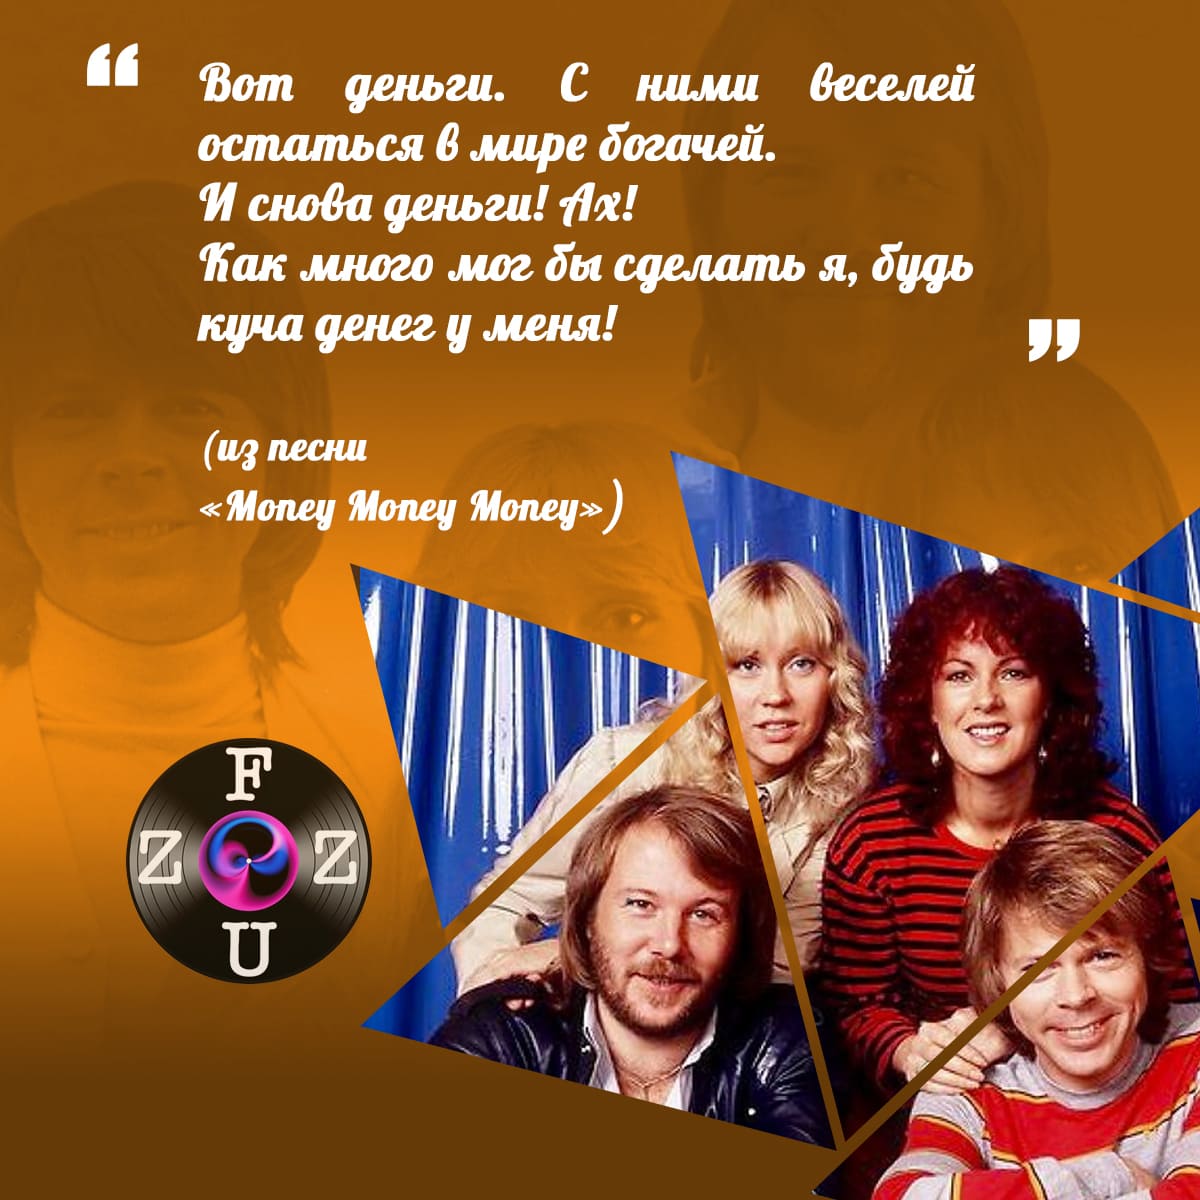 Quotes from ABBA songs...